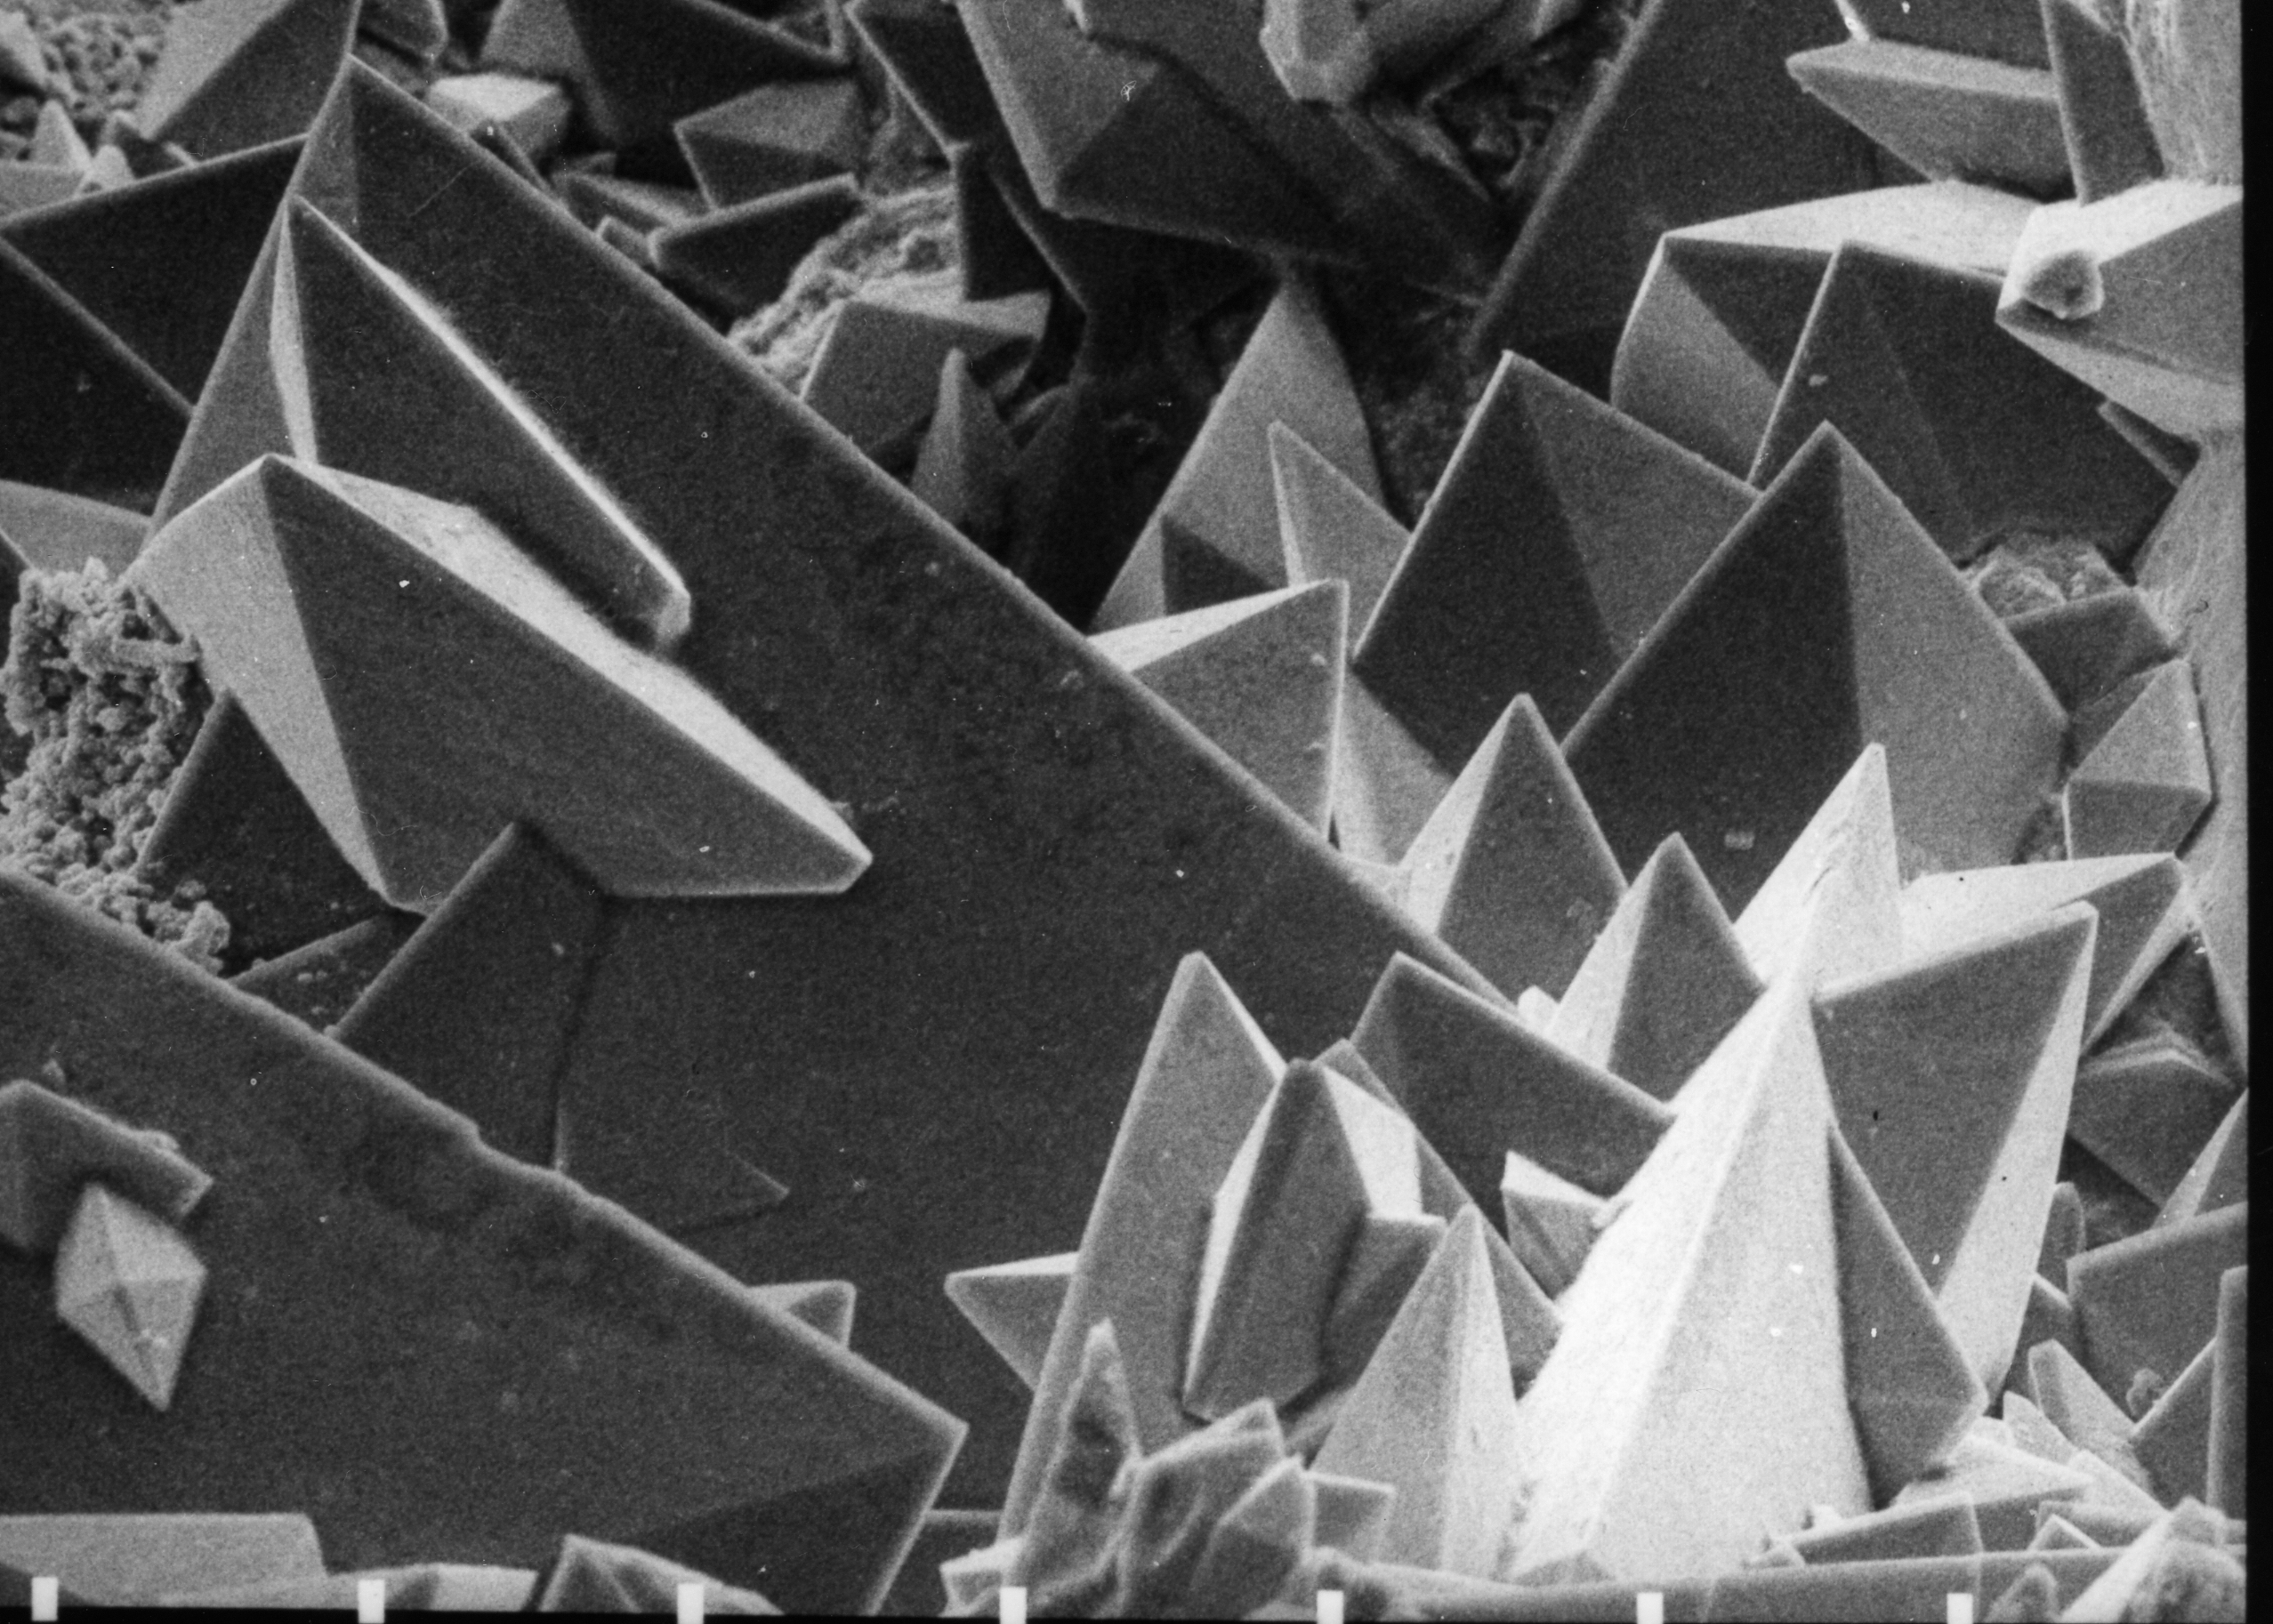 Calcium oxalate dihydrate crystals under Scanning Electron Micrograph (SEM) taken at 30 KV. Source: Wikimedia commons[22]